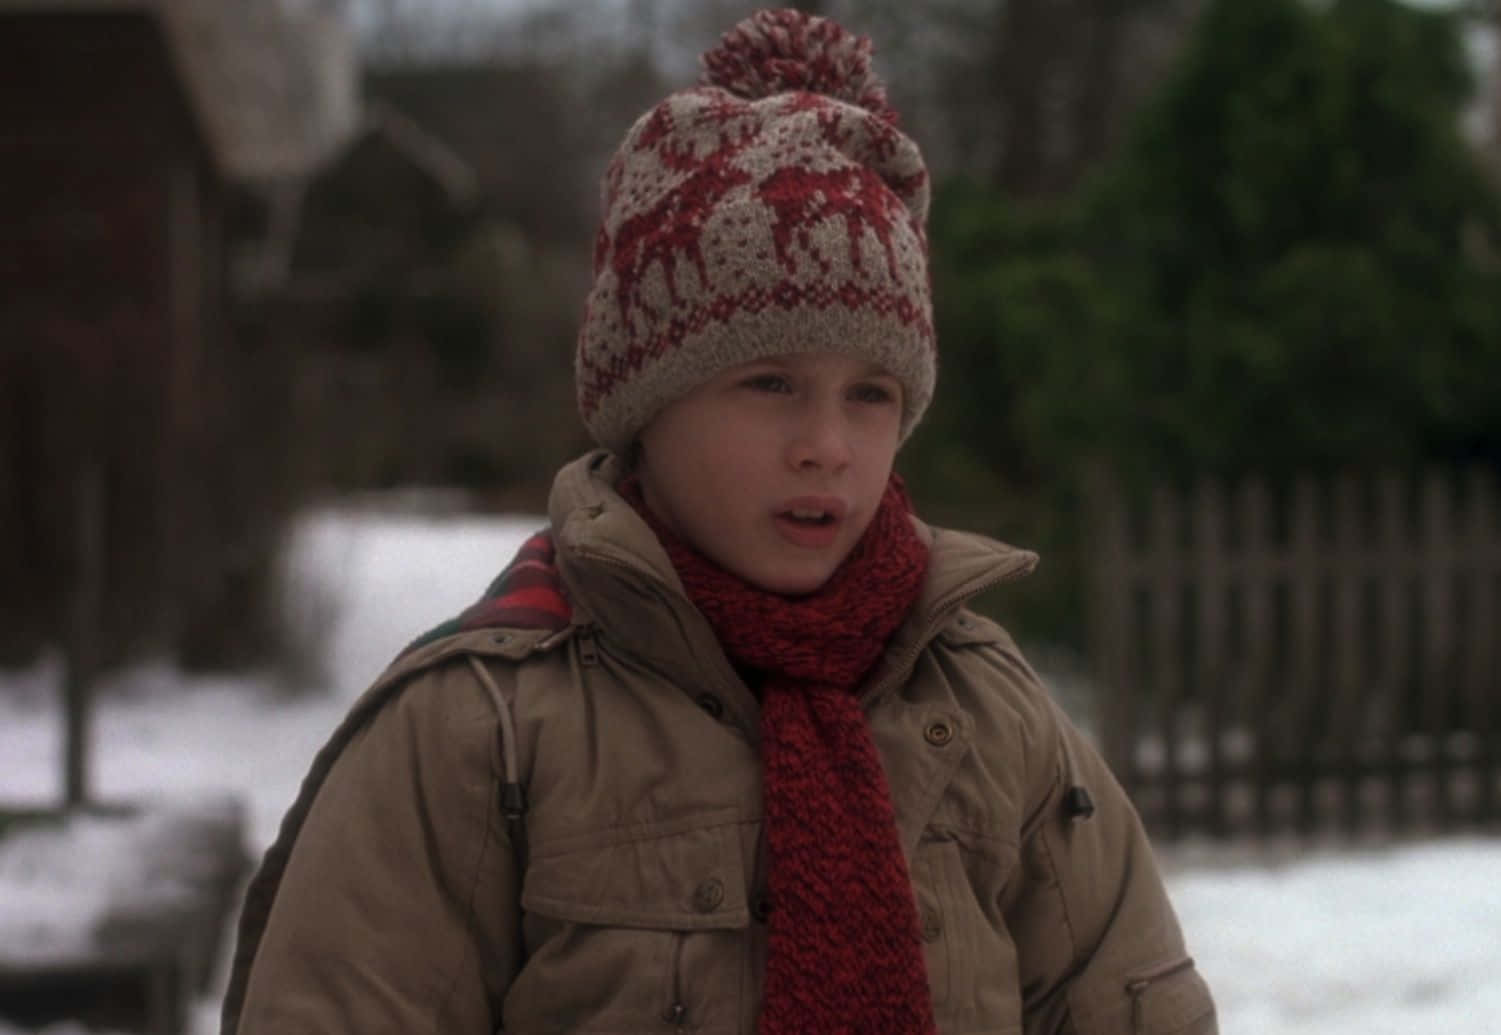 A Young Boy In A Red Hat And Scarf Standing In The Snow